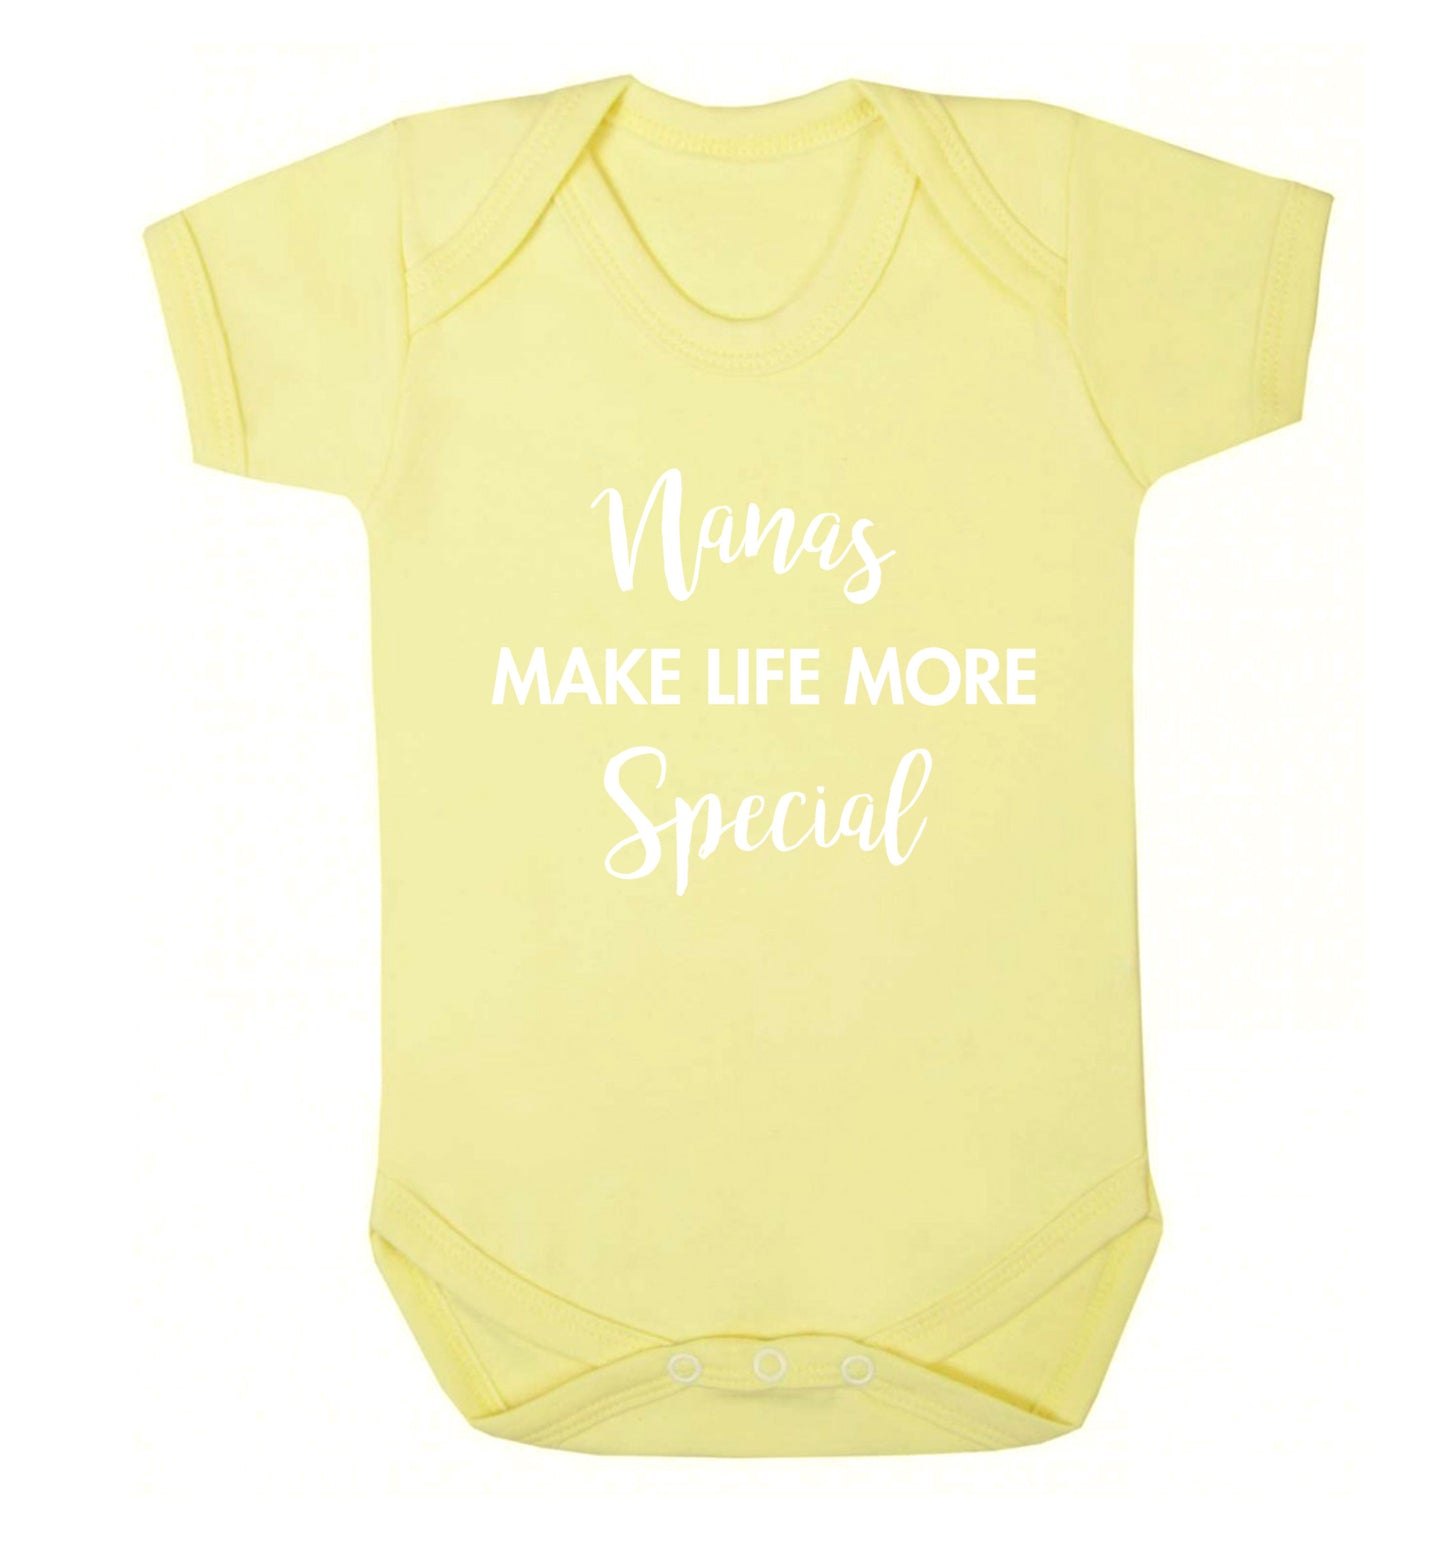 Nanas make life more special Baby Vest pale yellow 18-24 months